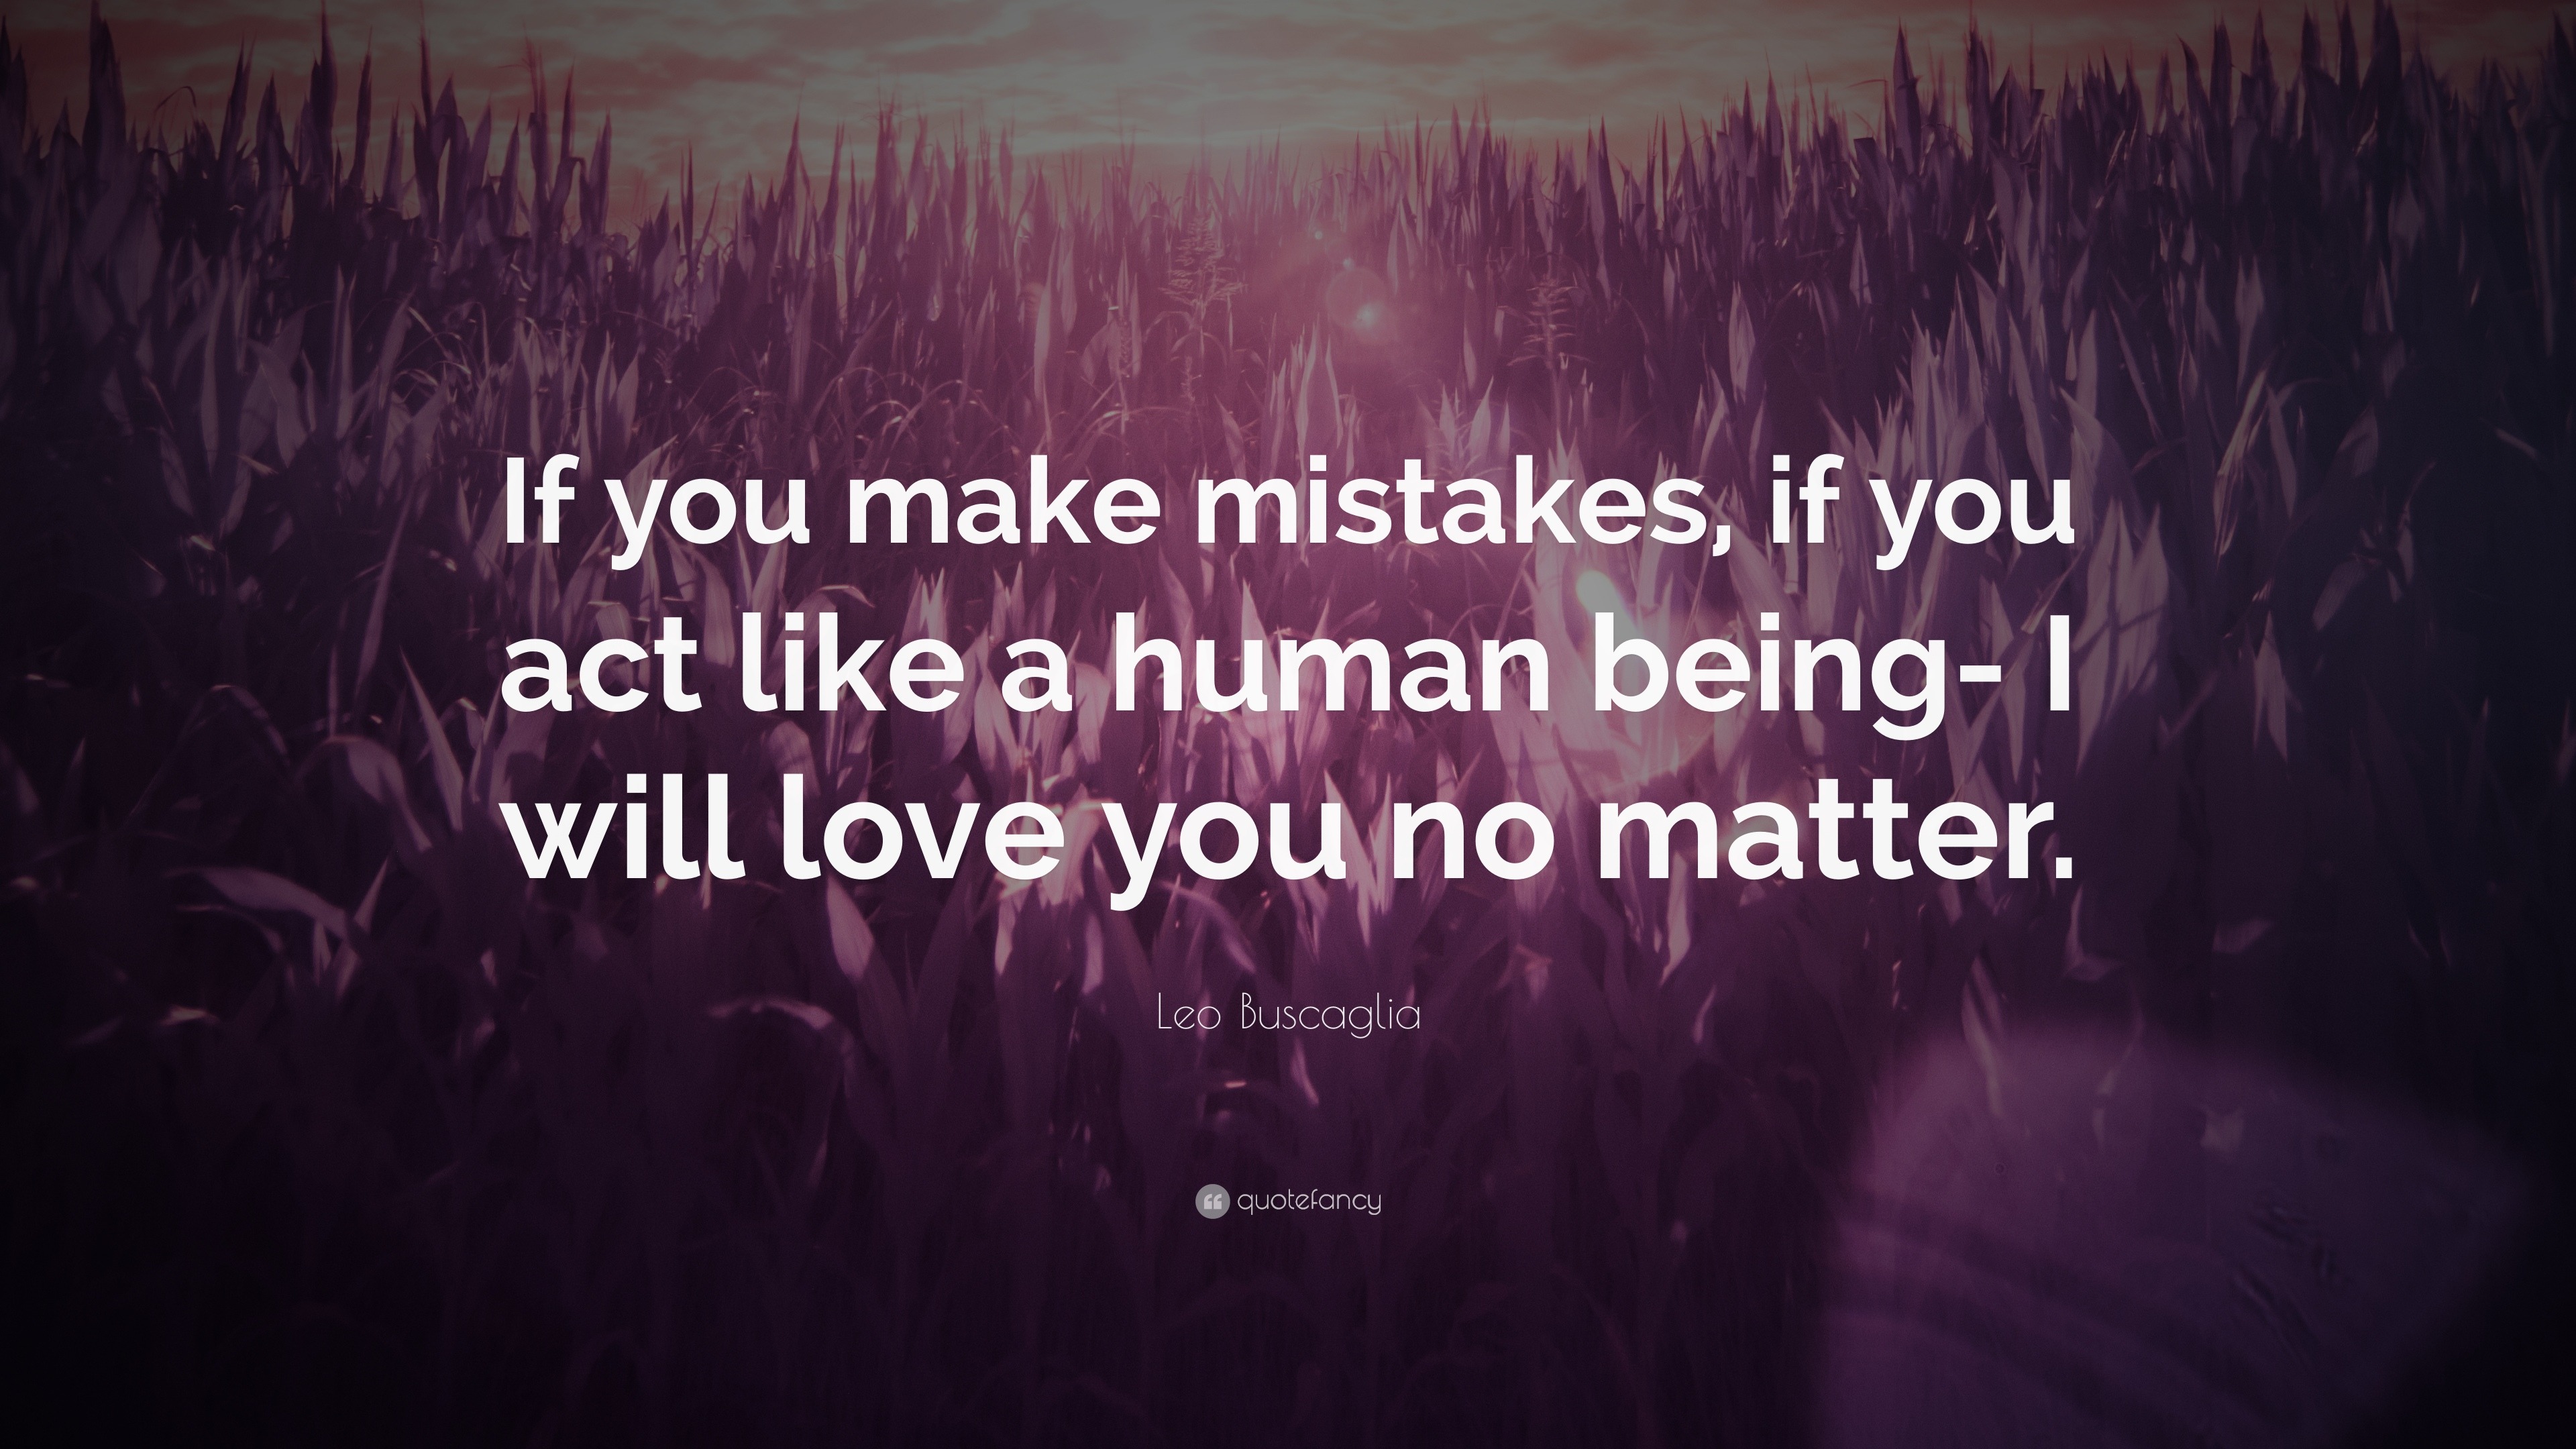 Leo Buscaglia Quote “If you make mistakes if you act like a human